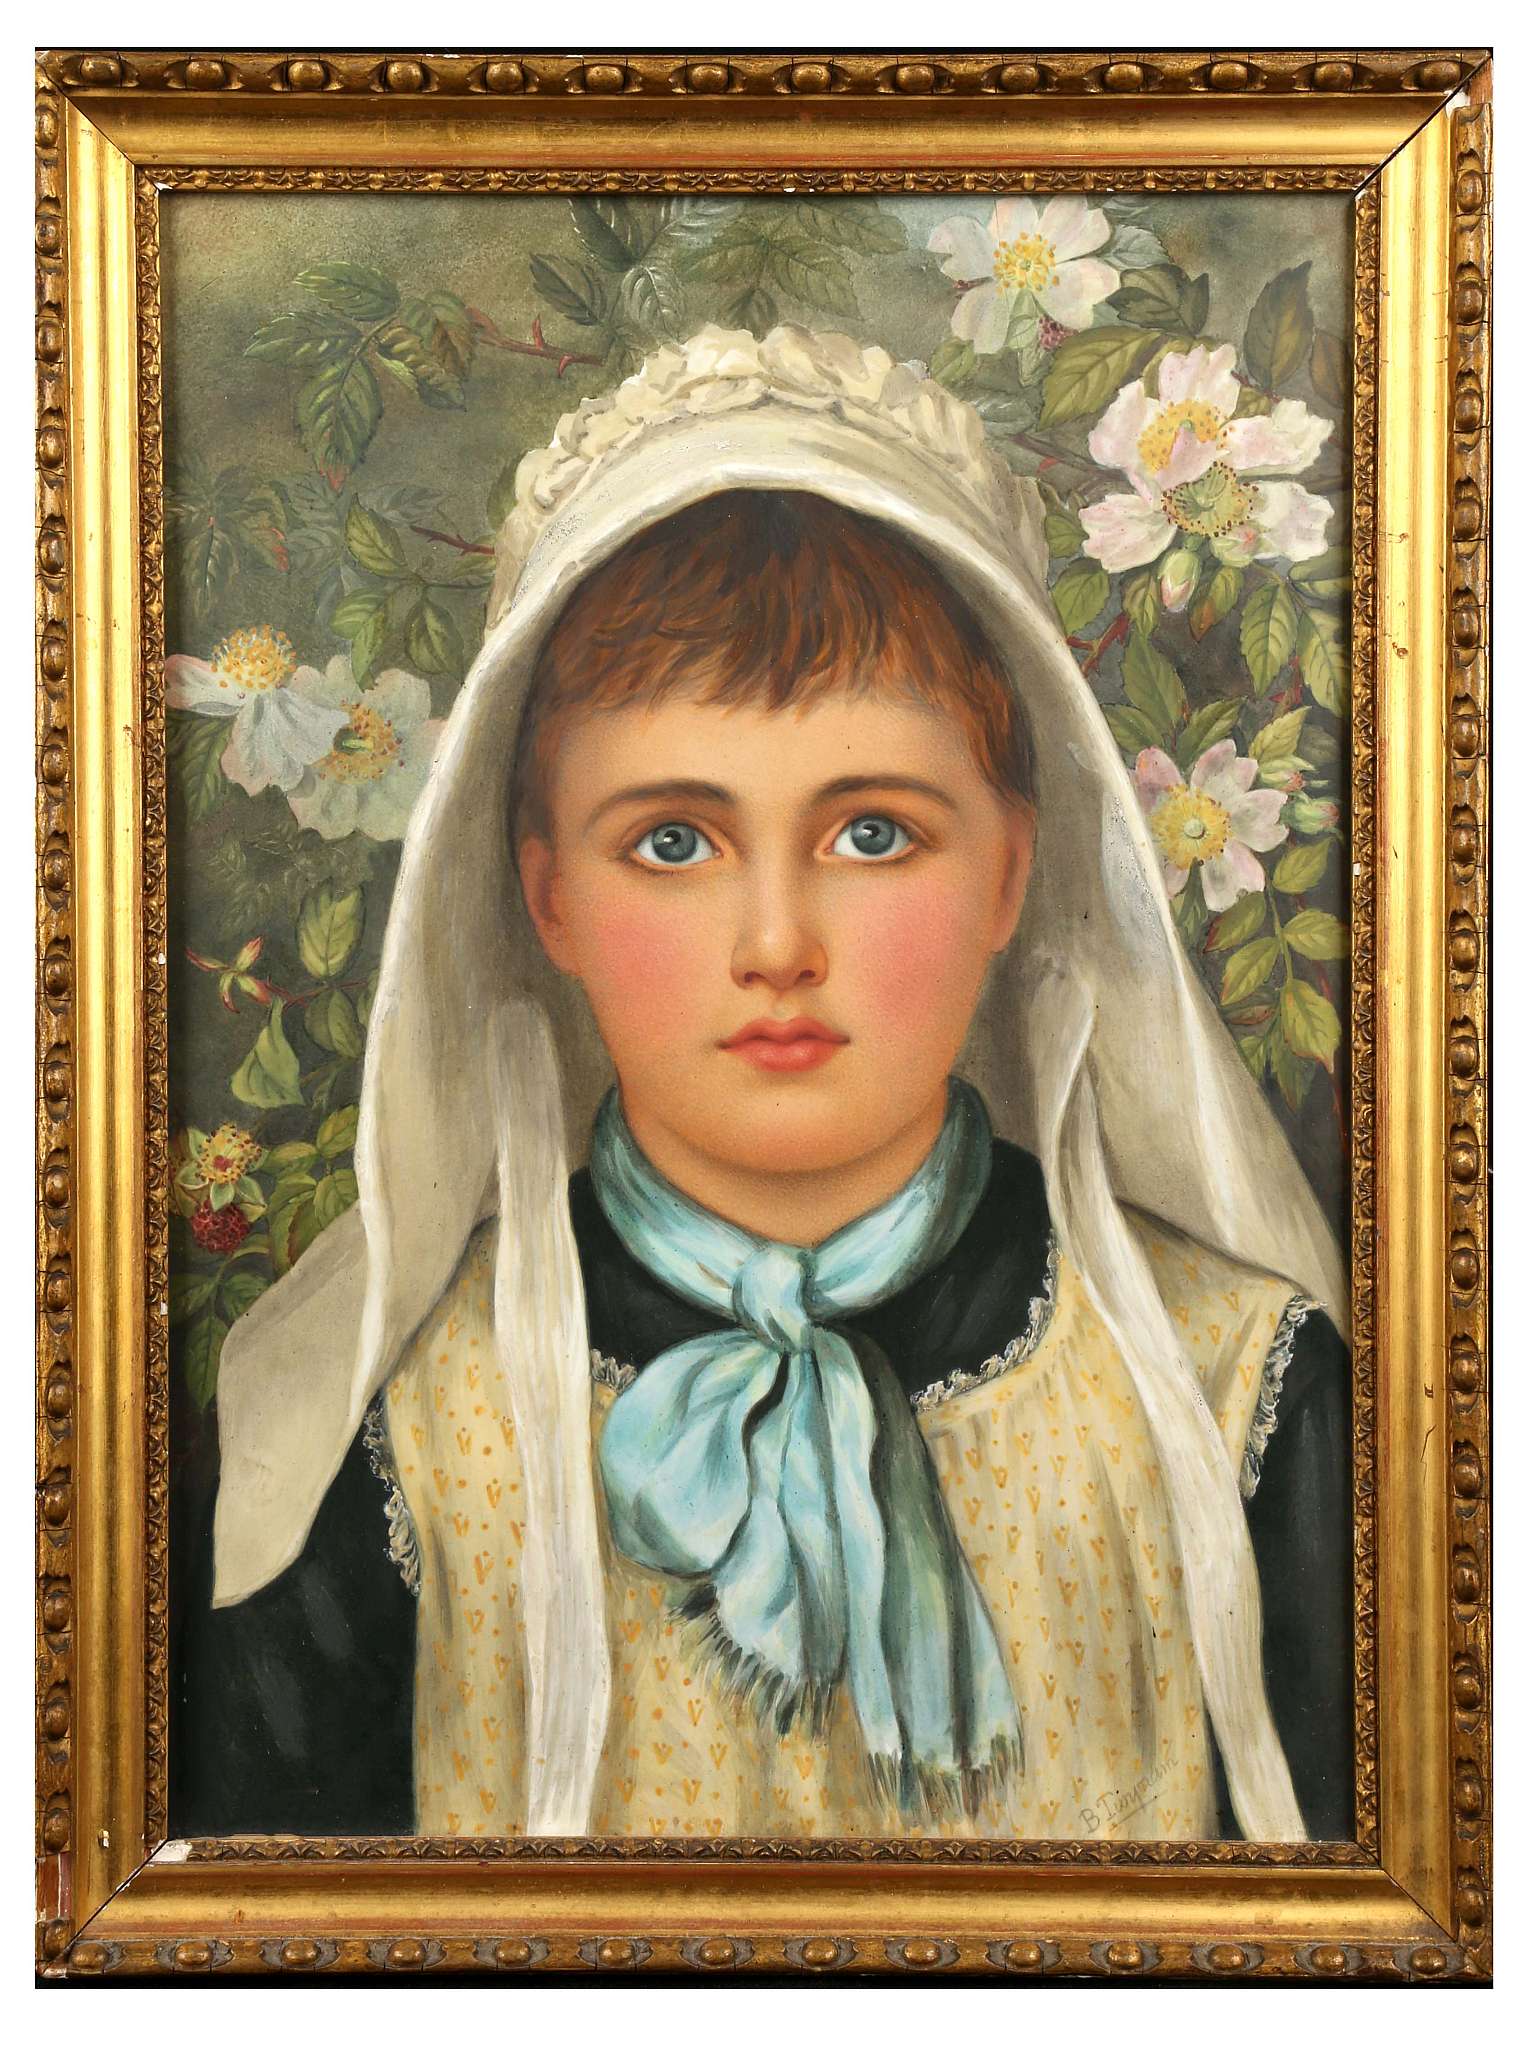 A PORCELAIN PLAQUE BY B. TURYNAM, late 19th century, finely pained with a young girl wearing a